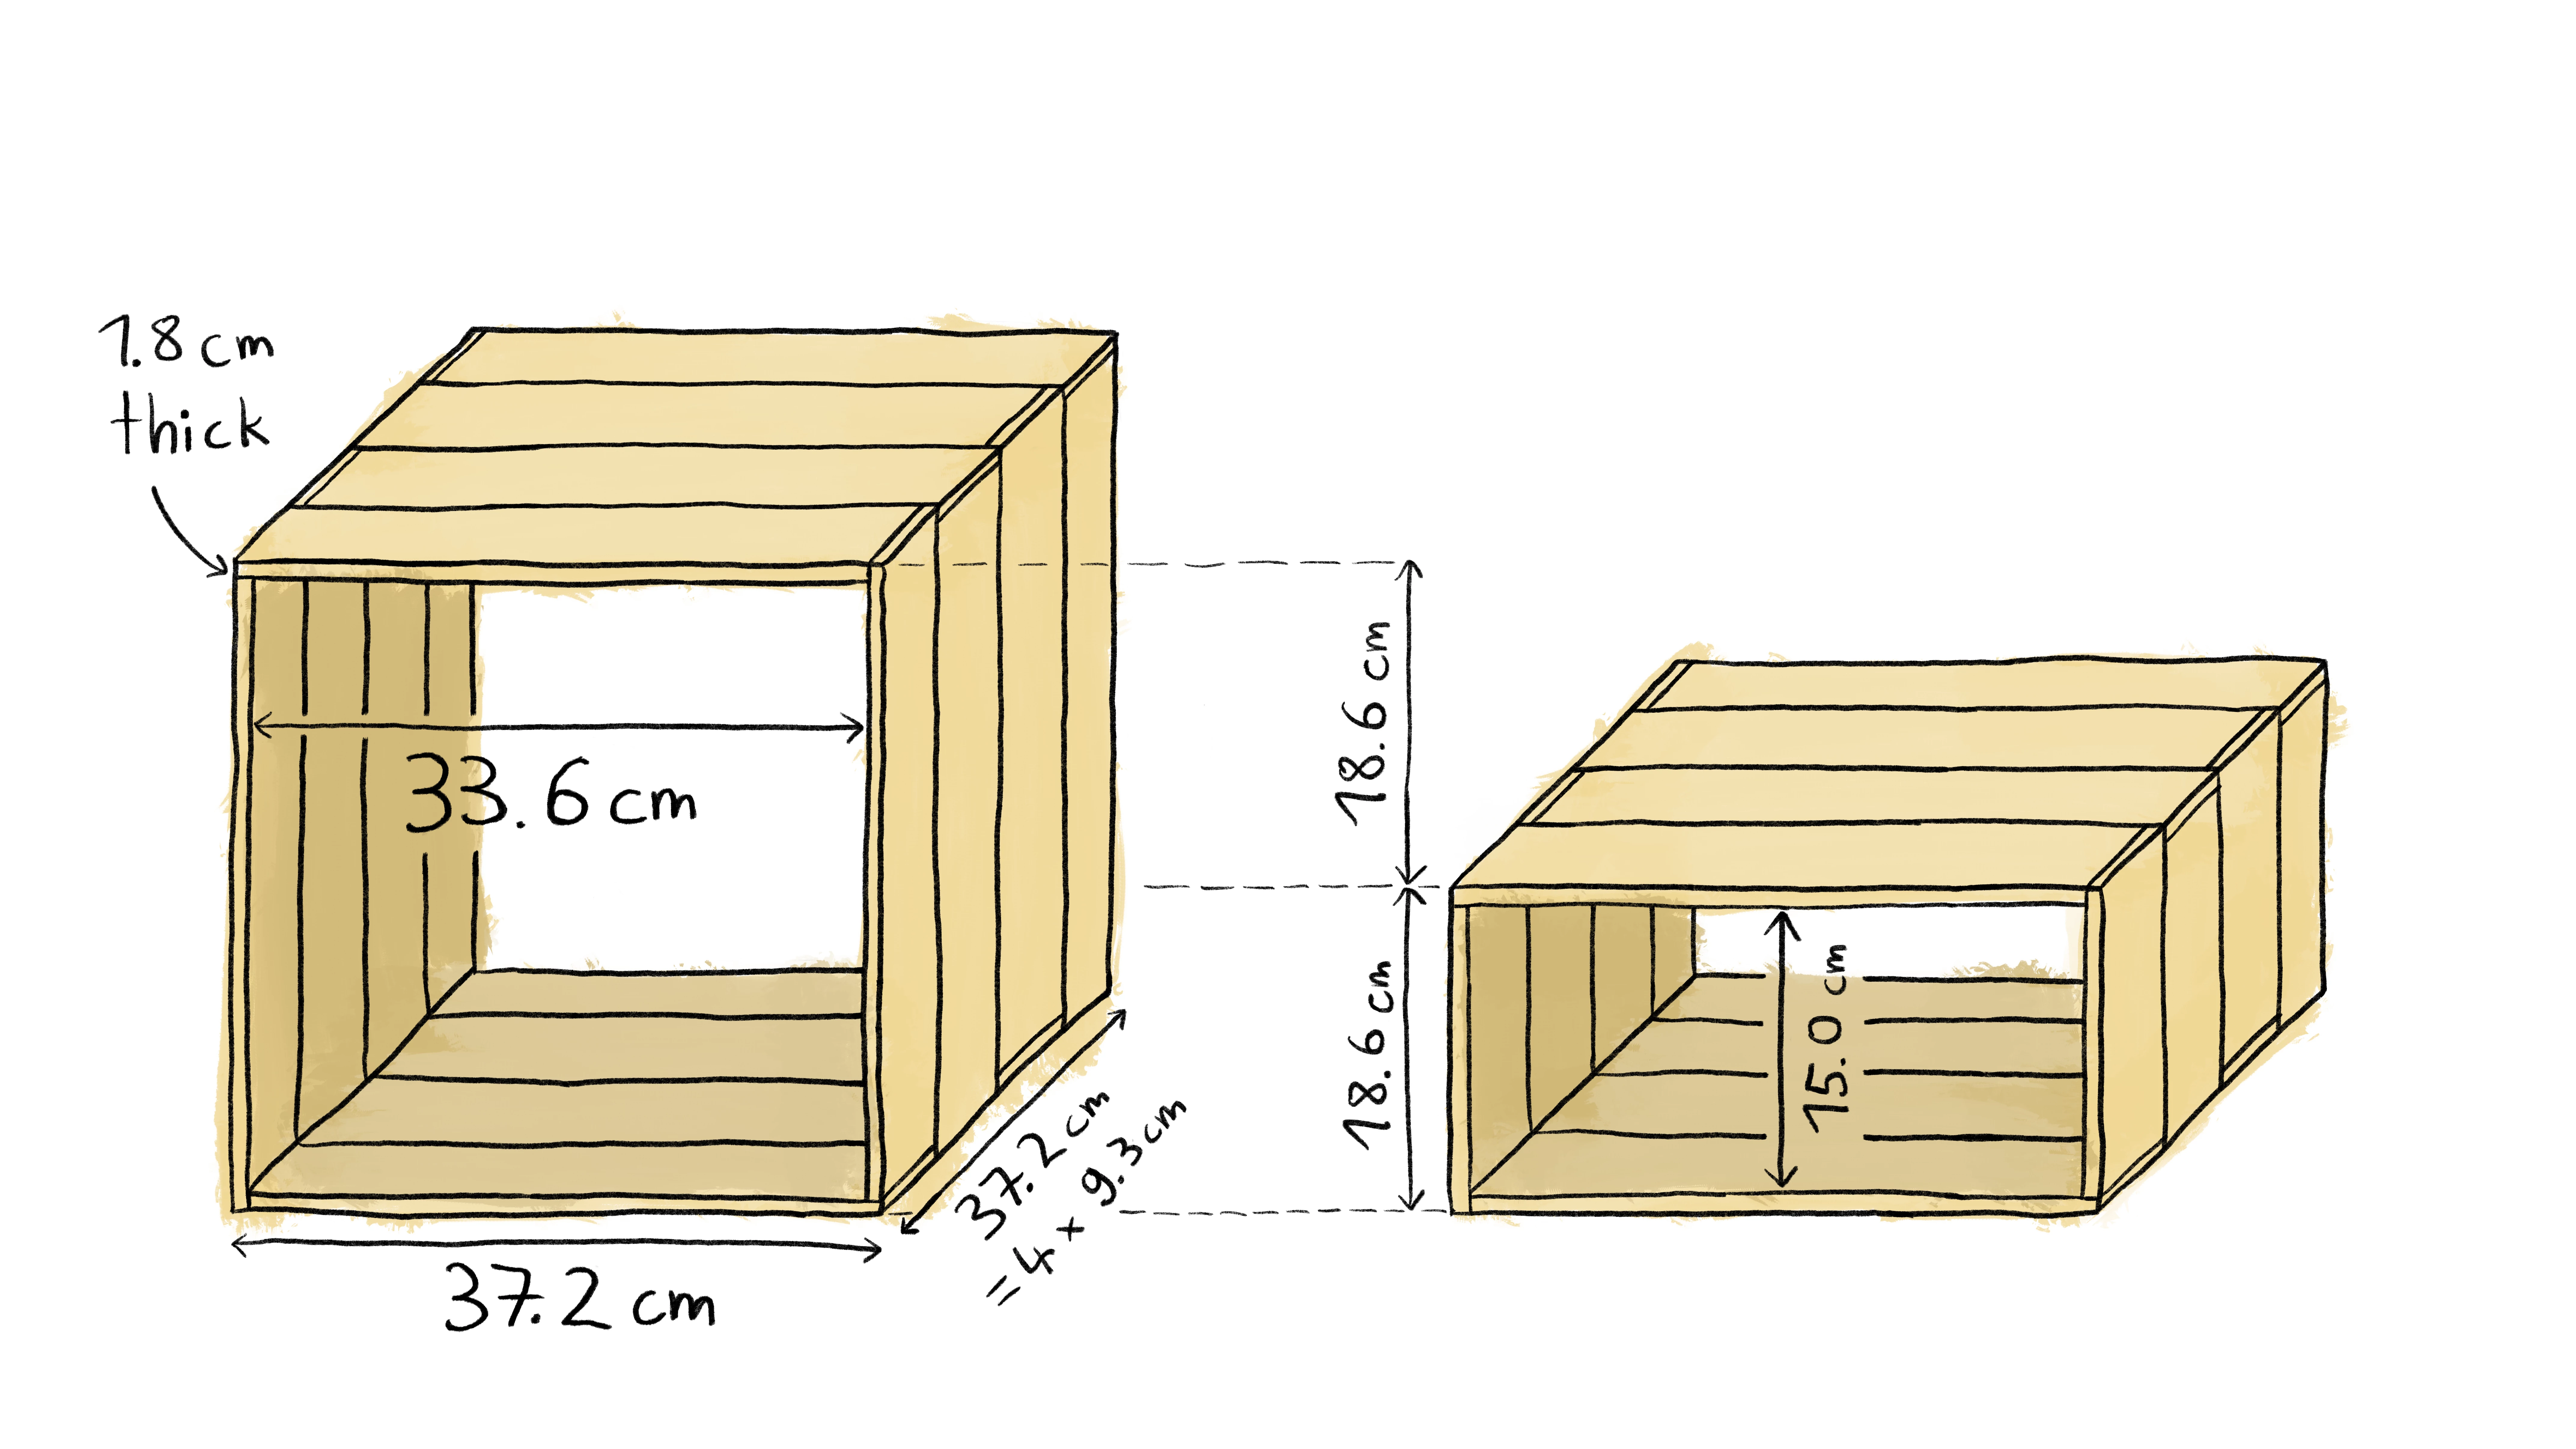 Dimensions of the shelf boxes